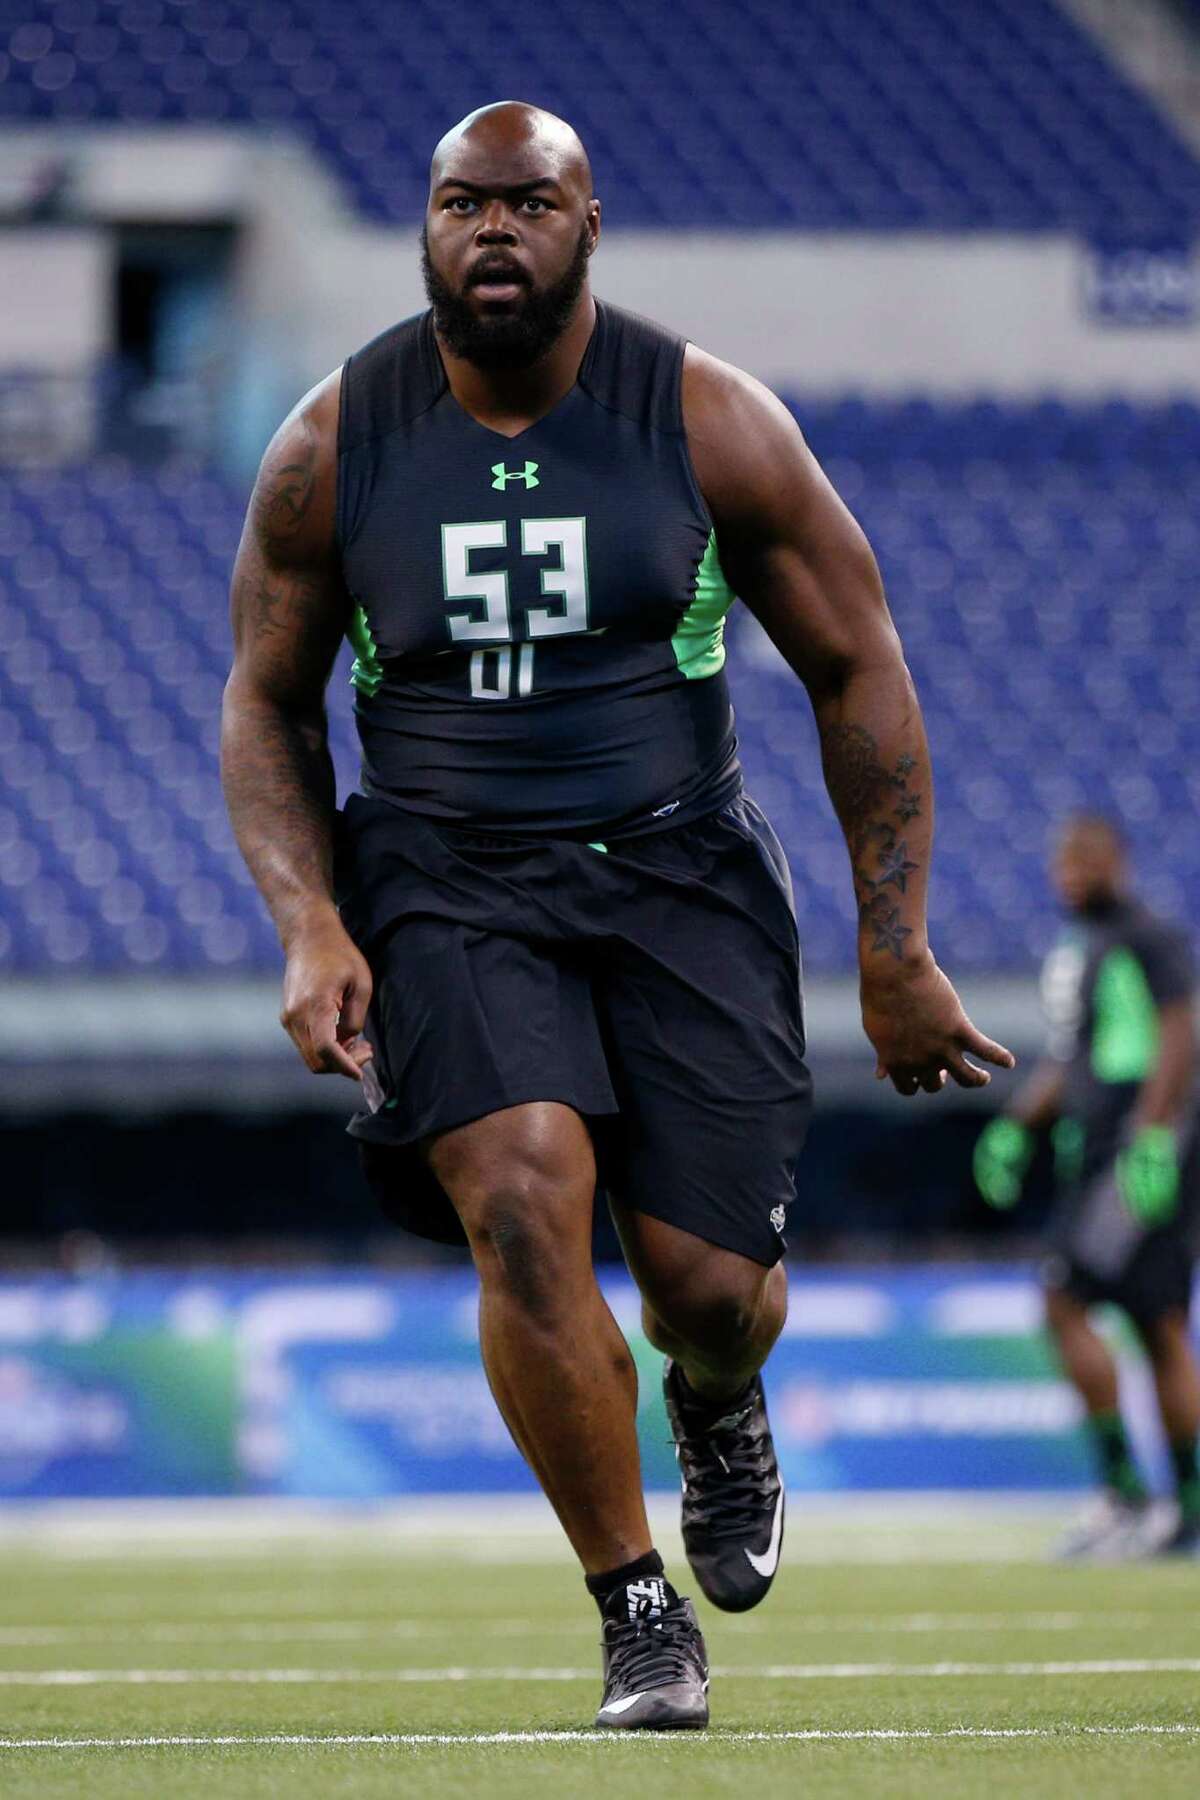 INDIANAPOLIS, IN - FEBRUARY 28: Defensive lineman A'Shawn Robinson of Alabama participates in a drill during the 2016 NFL Scouting Combine at Lucas Oil Stadium on February 28, 2016 in Indianapolis, Indiana.